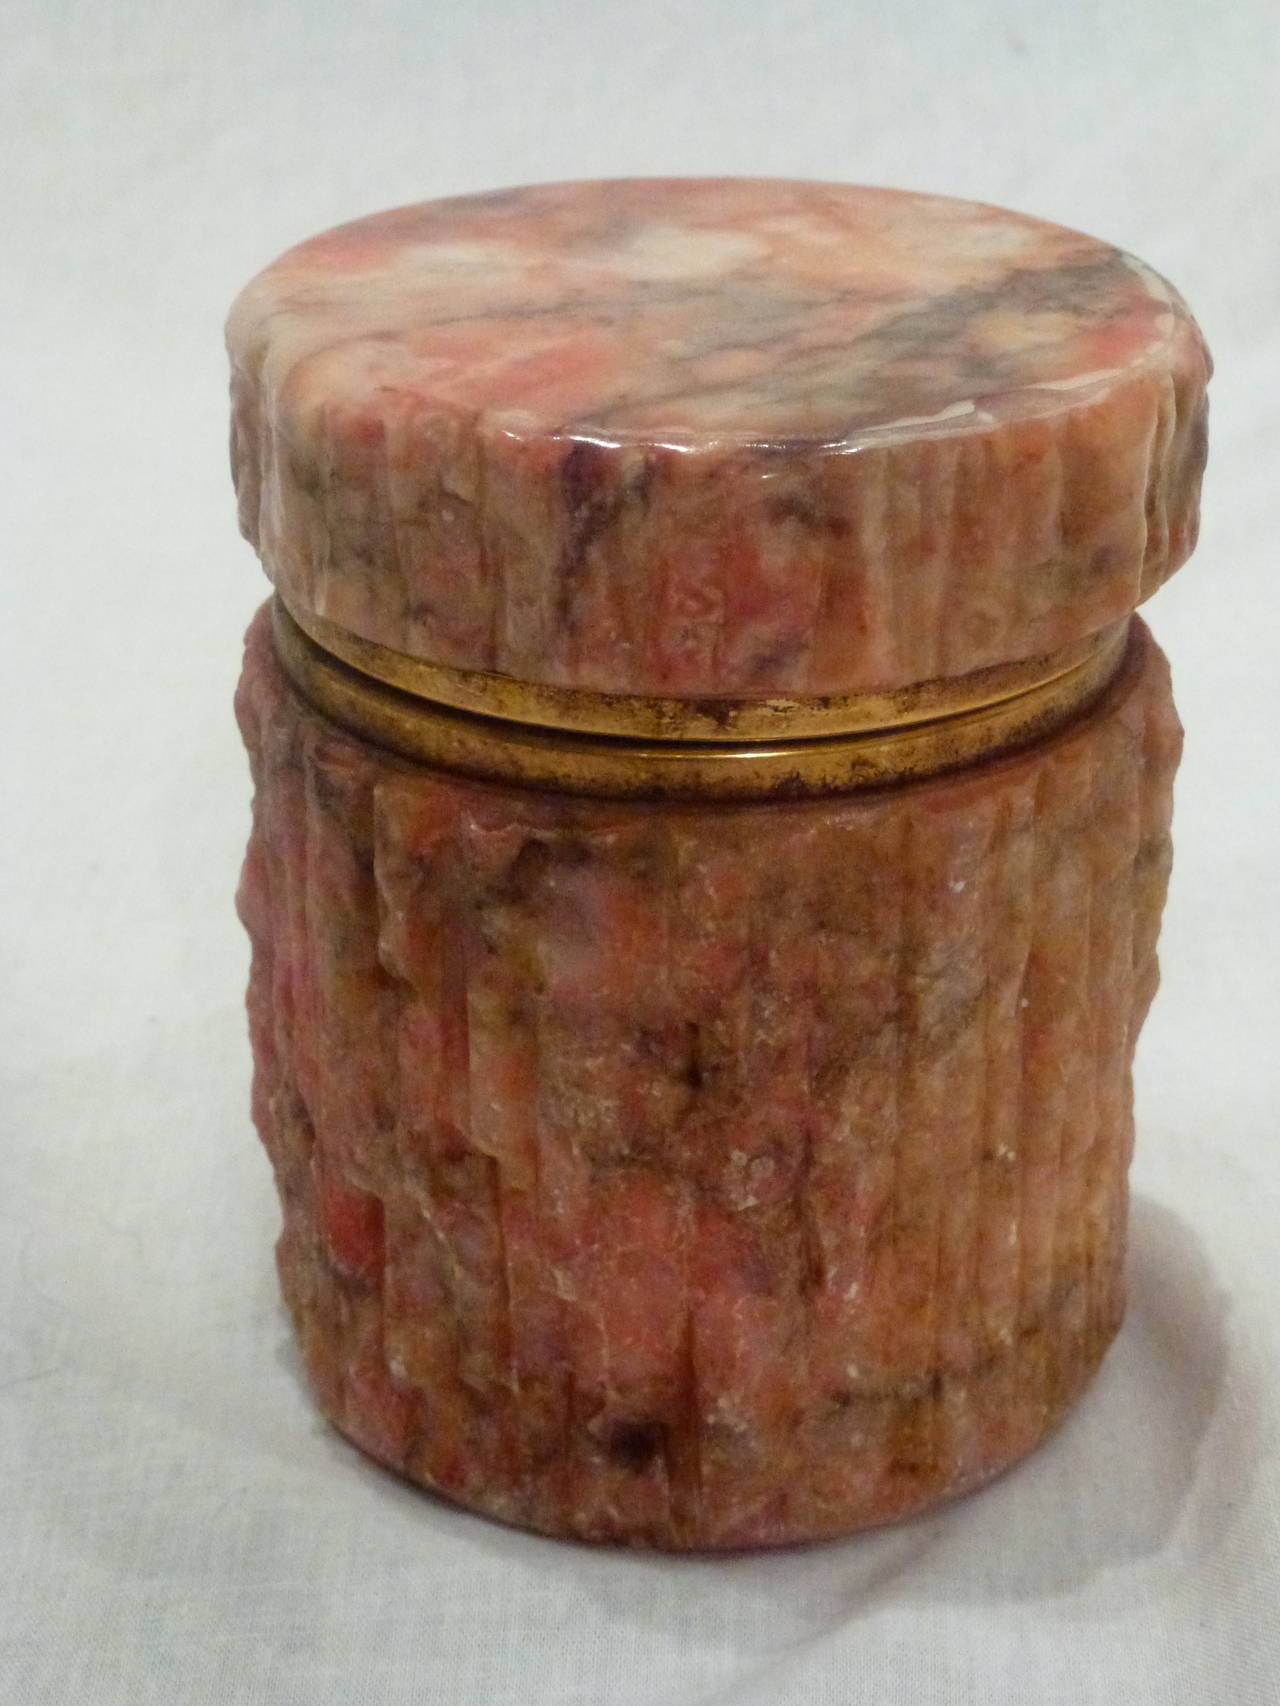 Striking Vintage Set of Coral Colored Marble Vessels from Italy.  The Cylindrical Box has a Hinged Lid with Bras Detailing and a Chiseled Finish to the Sides and a Polished Top. The Low Urn Shaped Bowl has a Polished Finish with a Rounded Rim at the